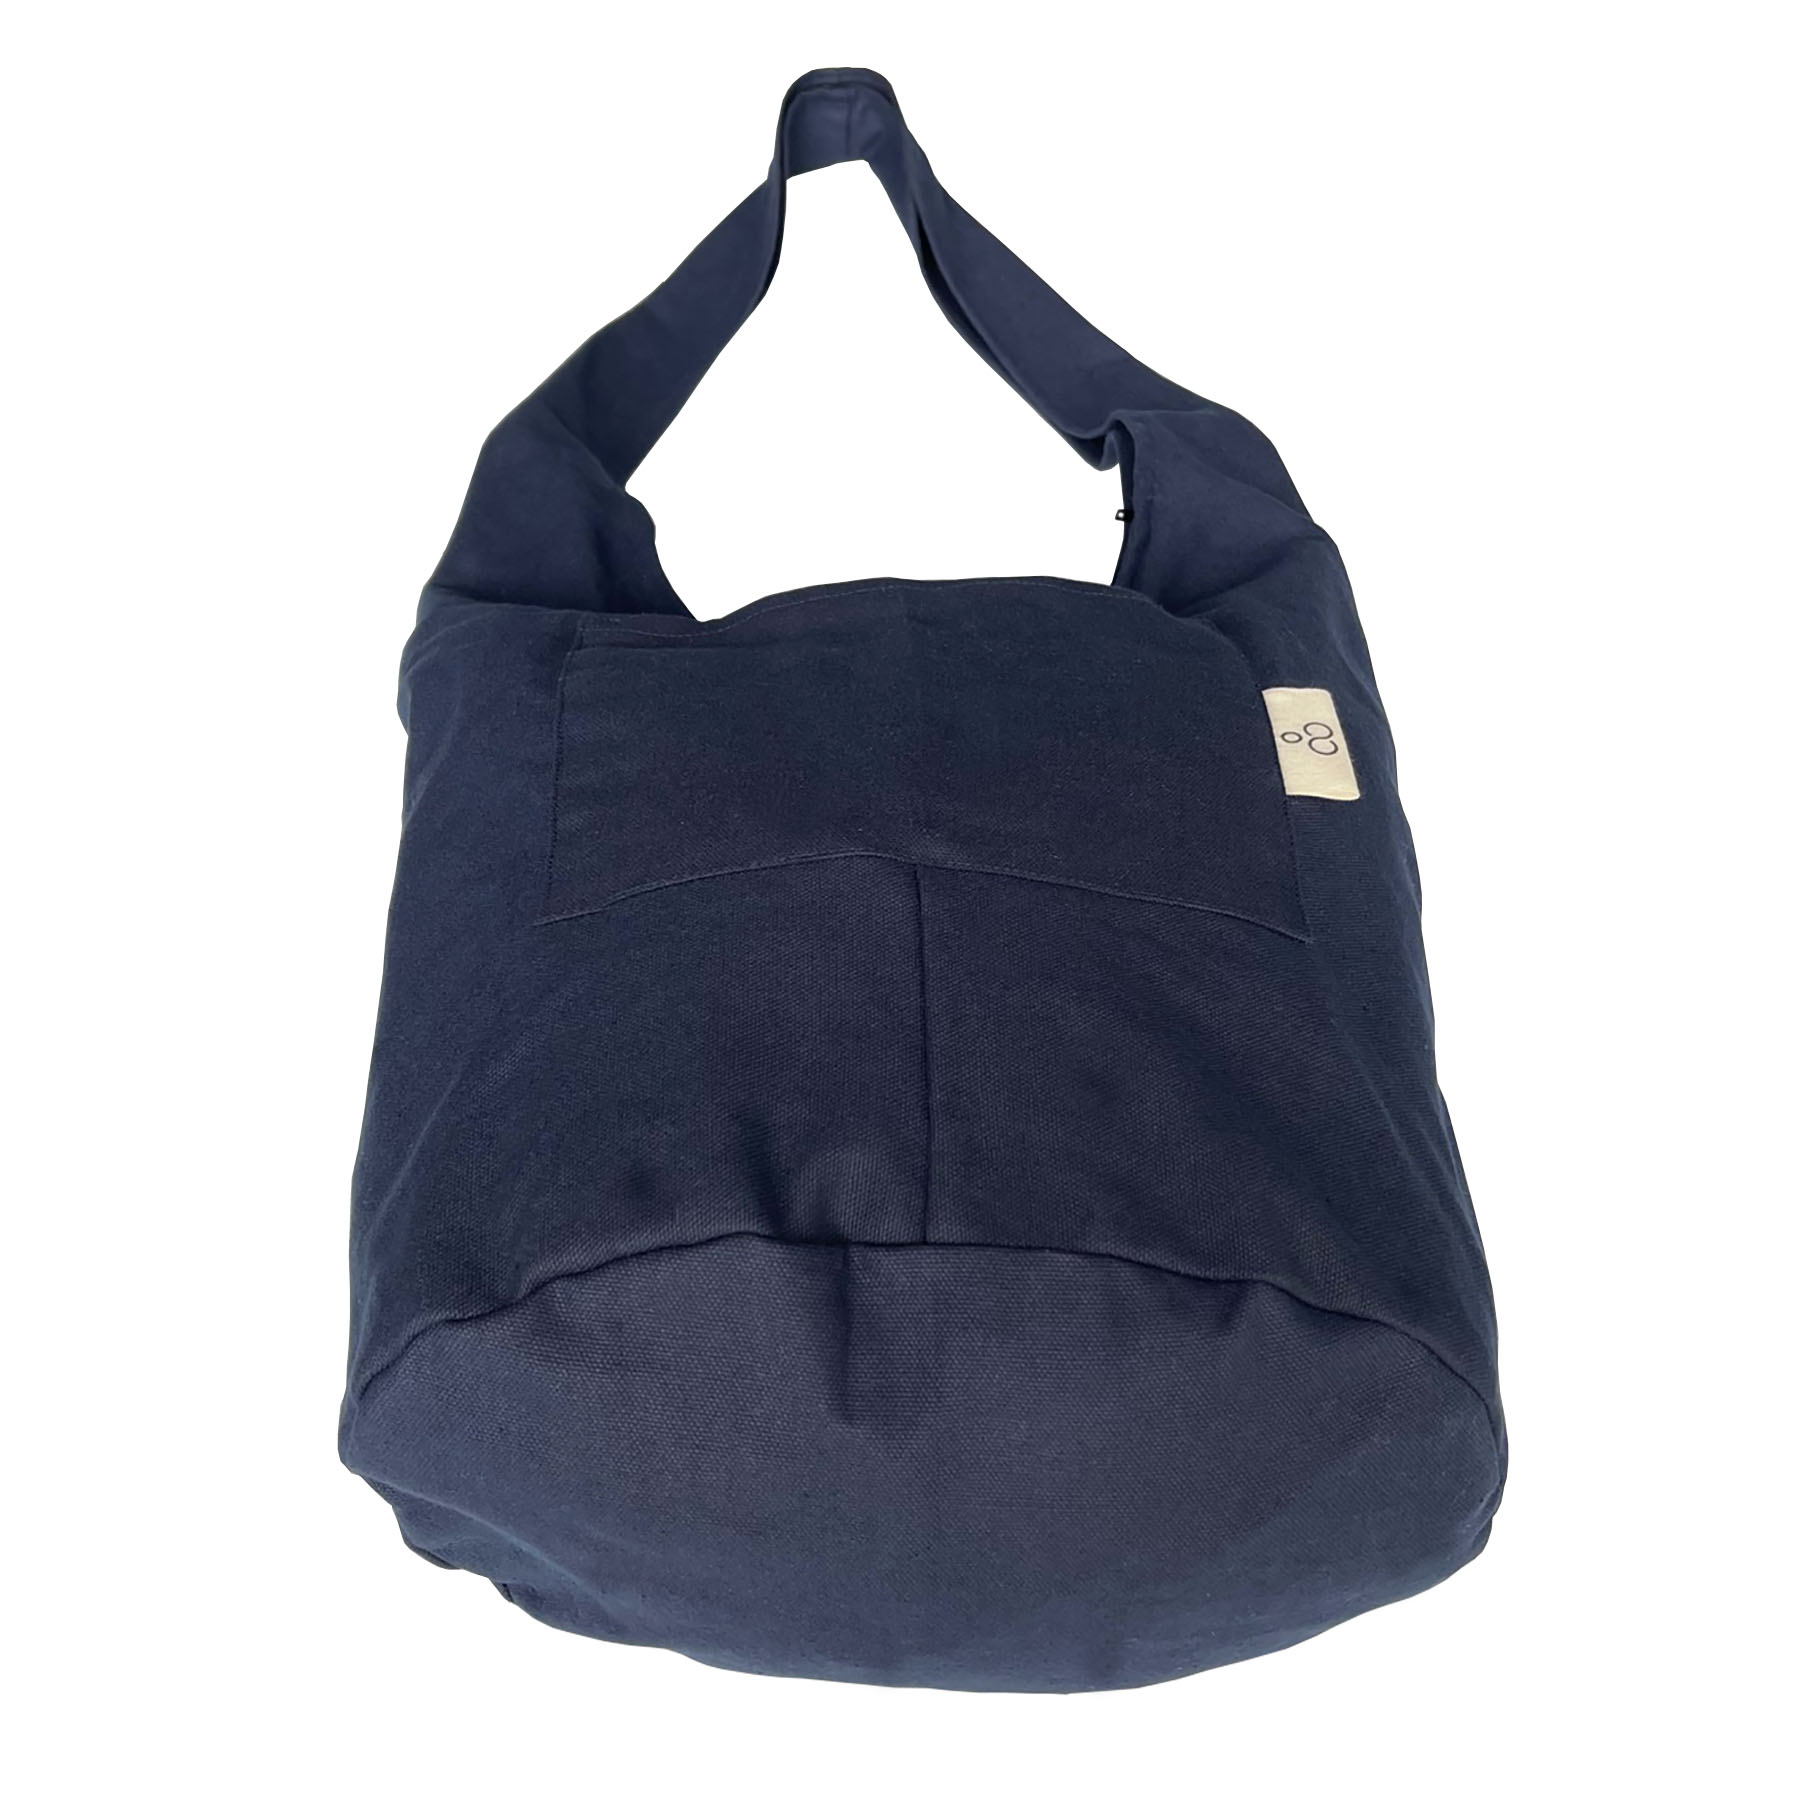 Cotton canvas bags for yoga and freetime